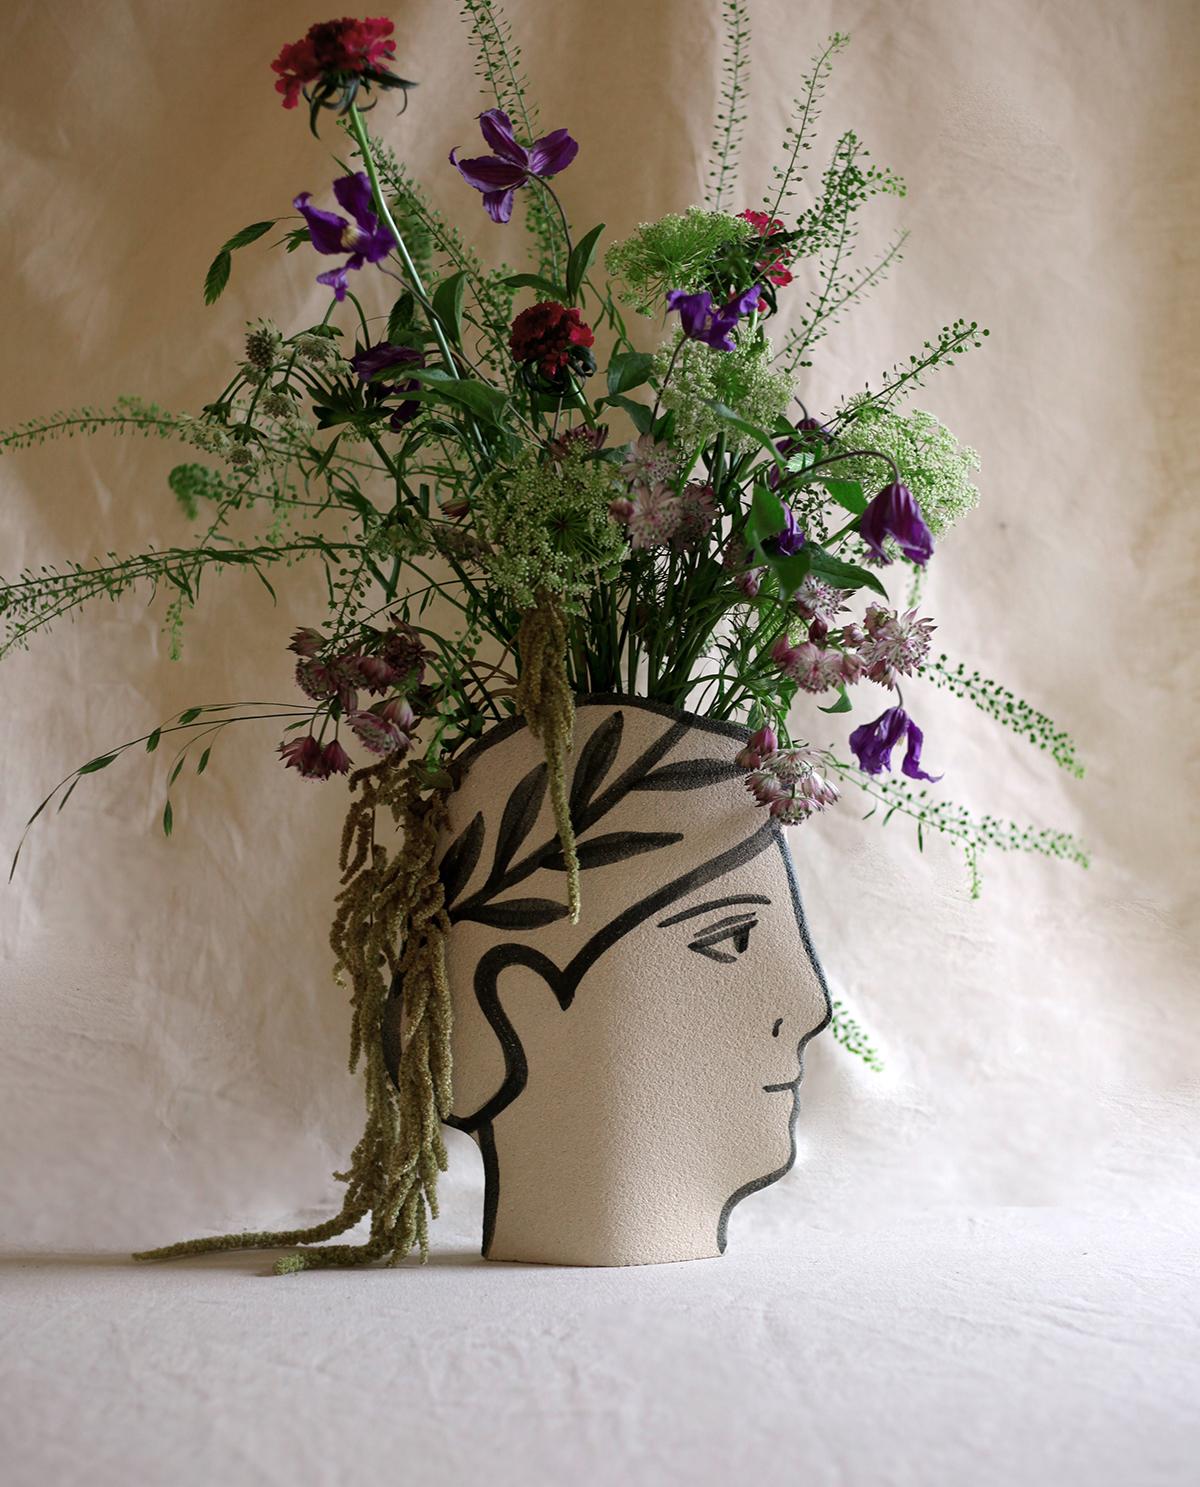 European 21st Century ‘Artemis - Black’, in White Ceramic, Hand-Crafted in France For Sale